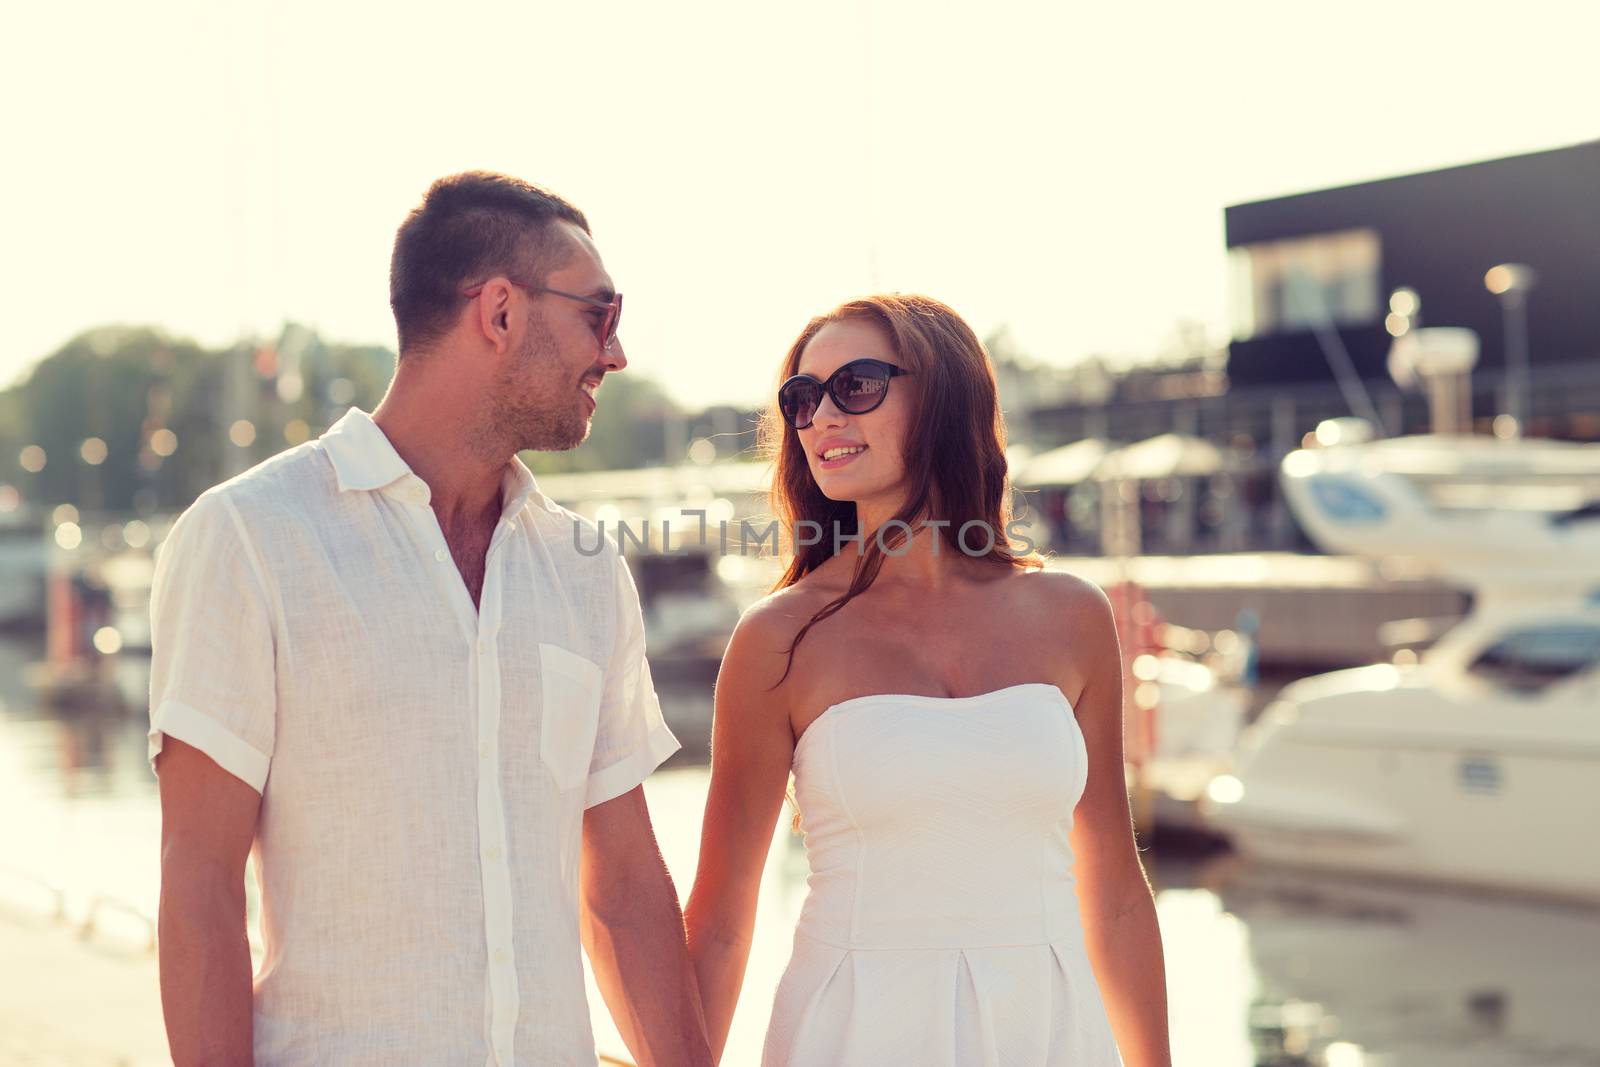 love, travel, tourism and people concept - smiling couple wearing sunglasses walking at harbor